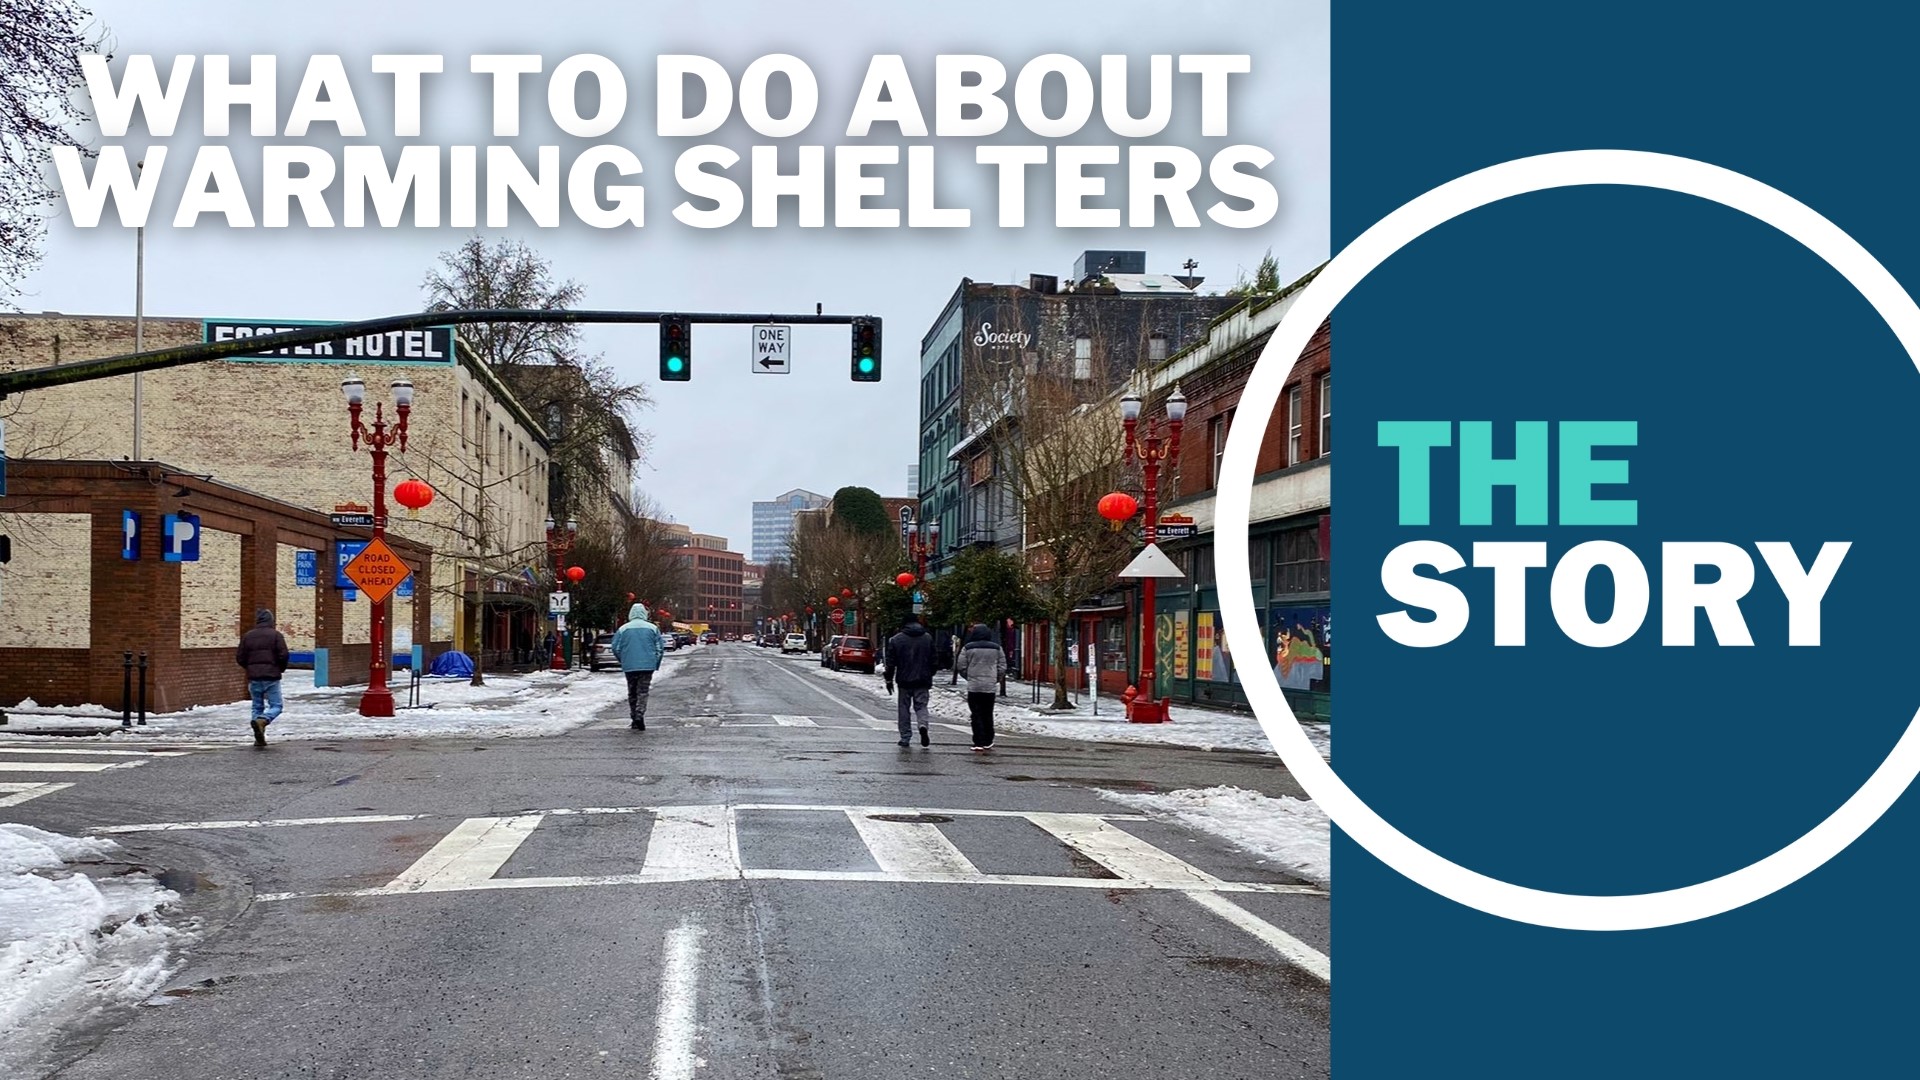 After the decision to close warming shelters in Multnomah County during last week's winter weather, there are calls to revisit Portland's emergency management plans.